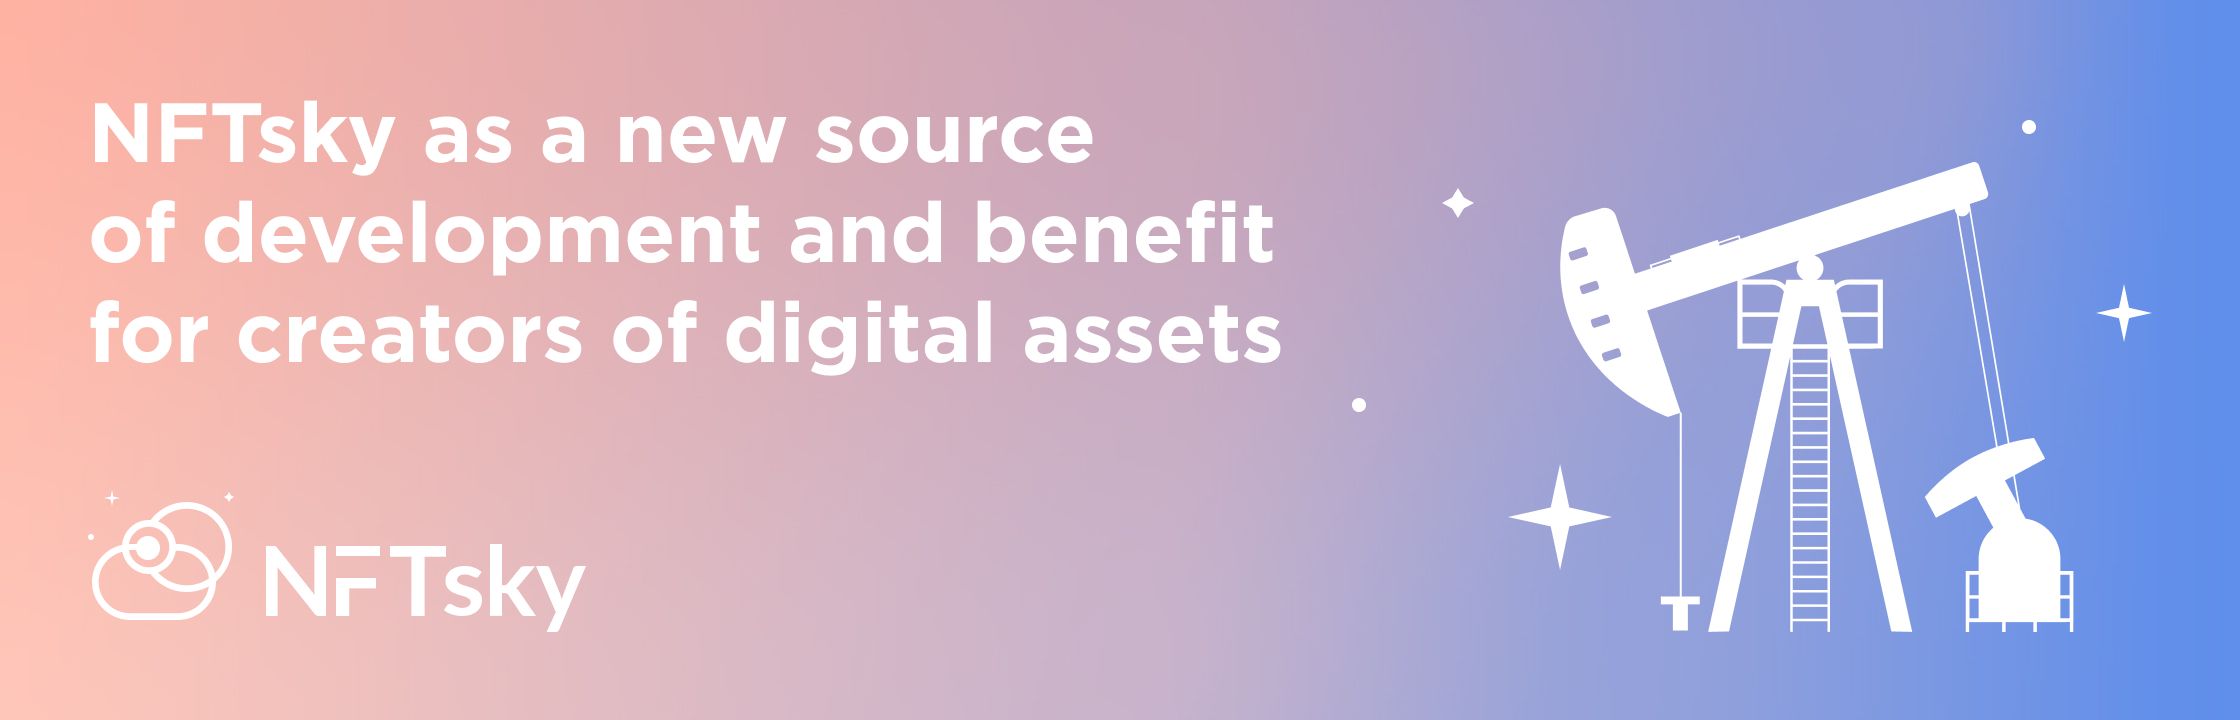 NFTsky as a new source of development and benefit for creators of digital assetson NFTsky